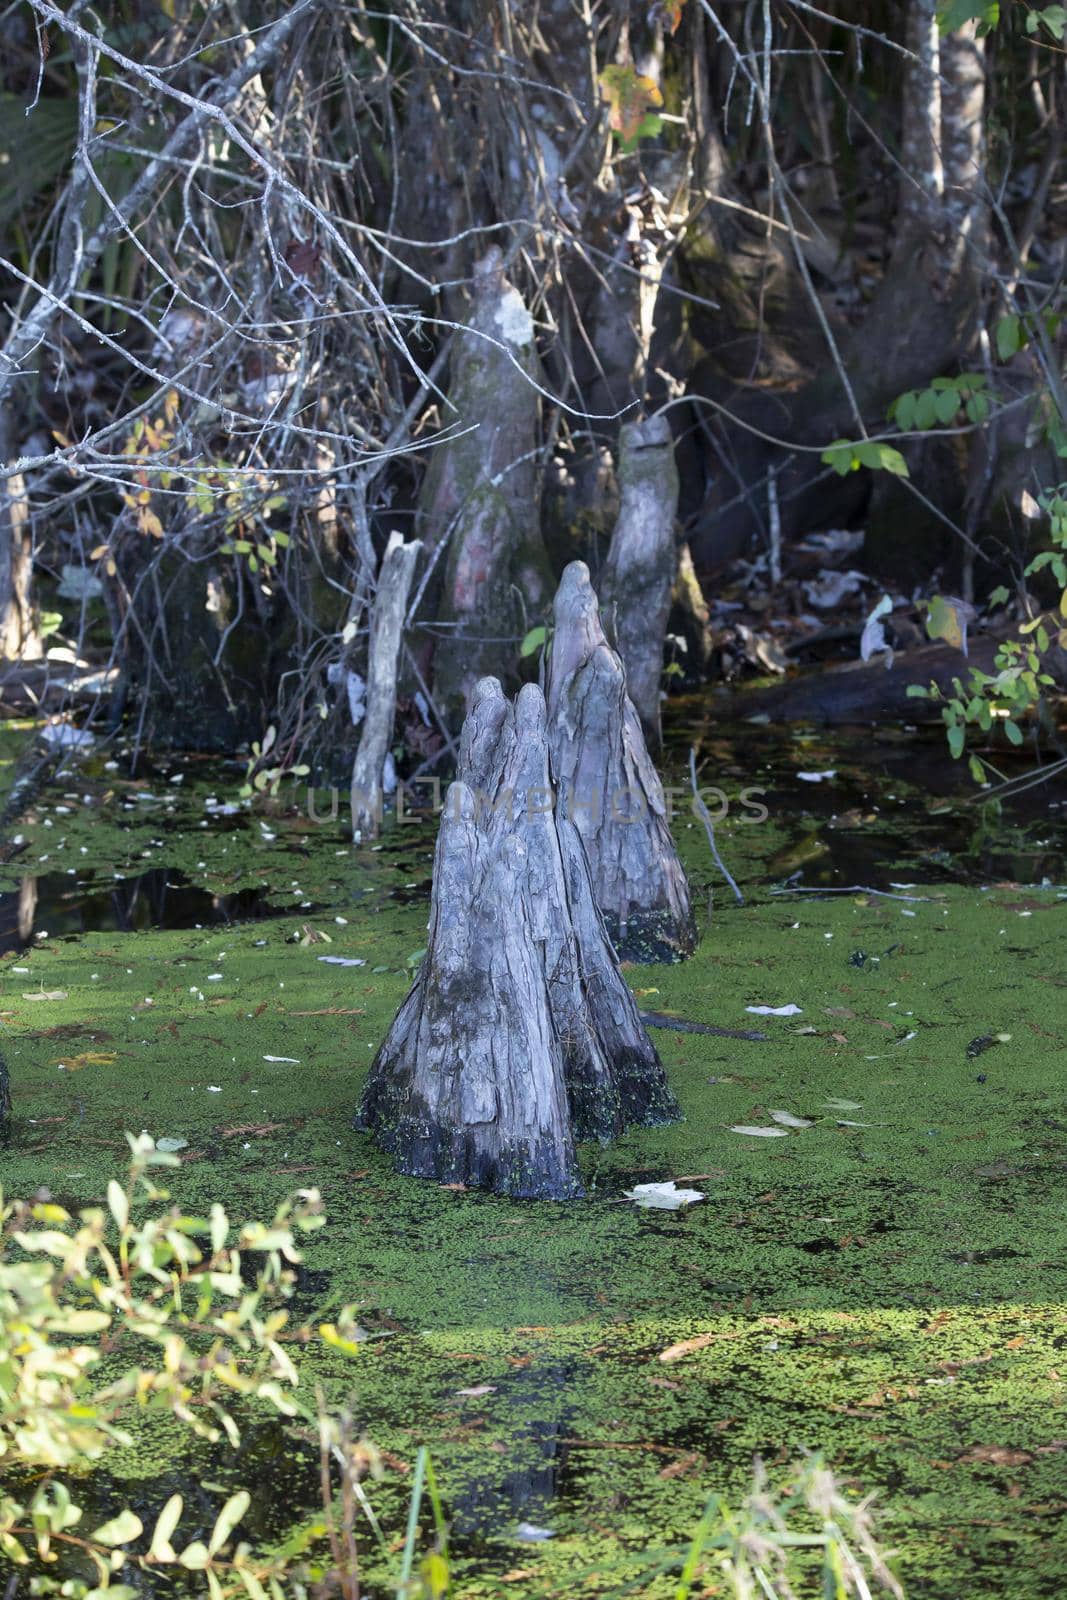 Cypress tree knees jutting out along the edge of a swamp lake